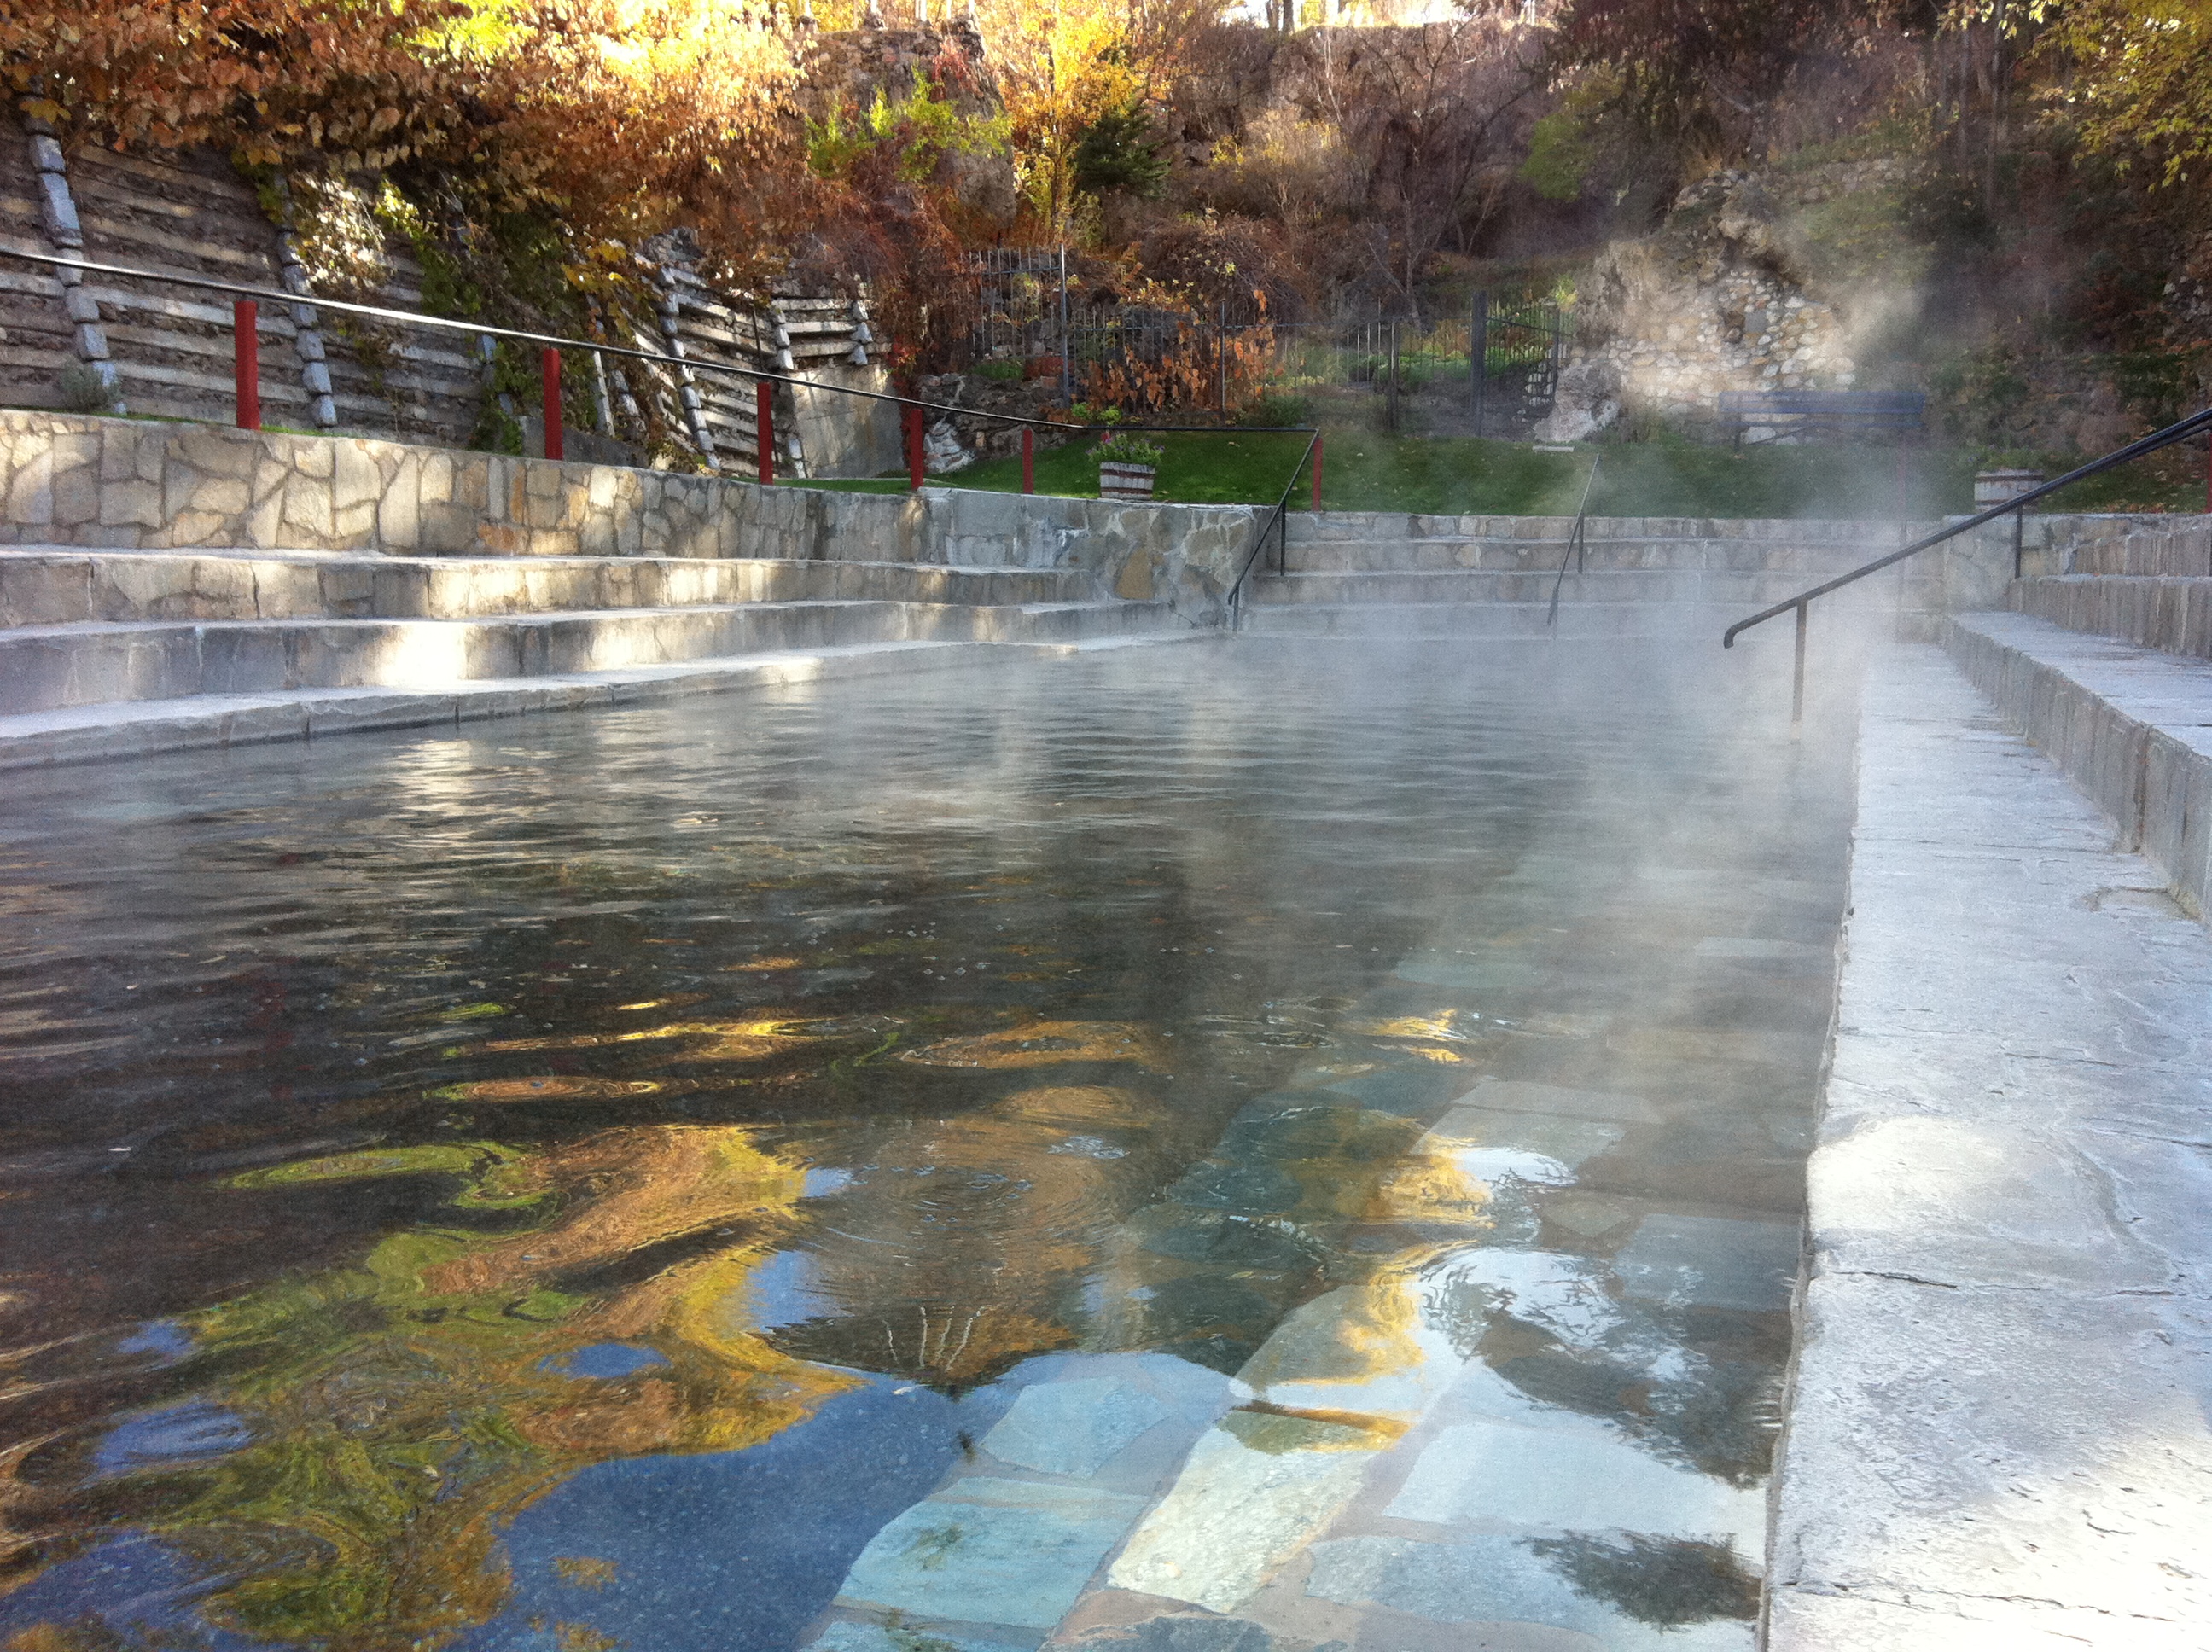 Hot spring place